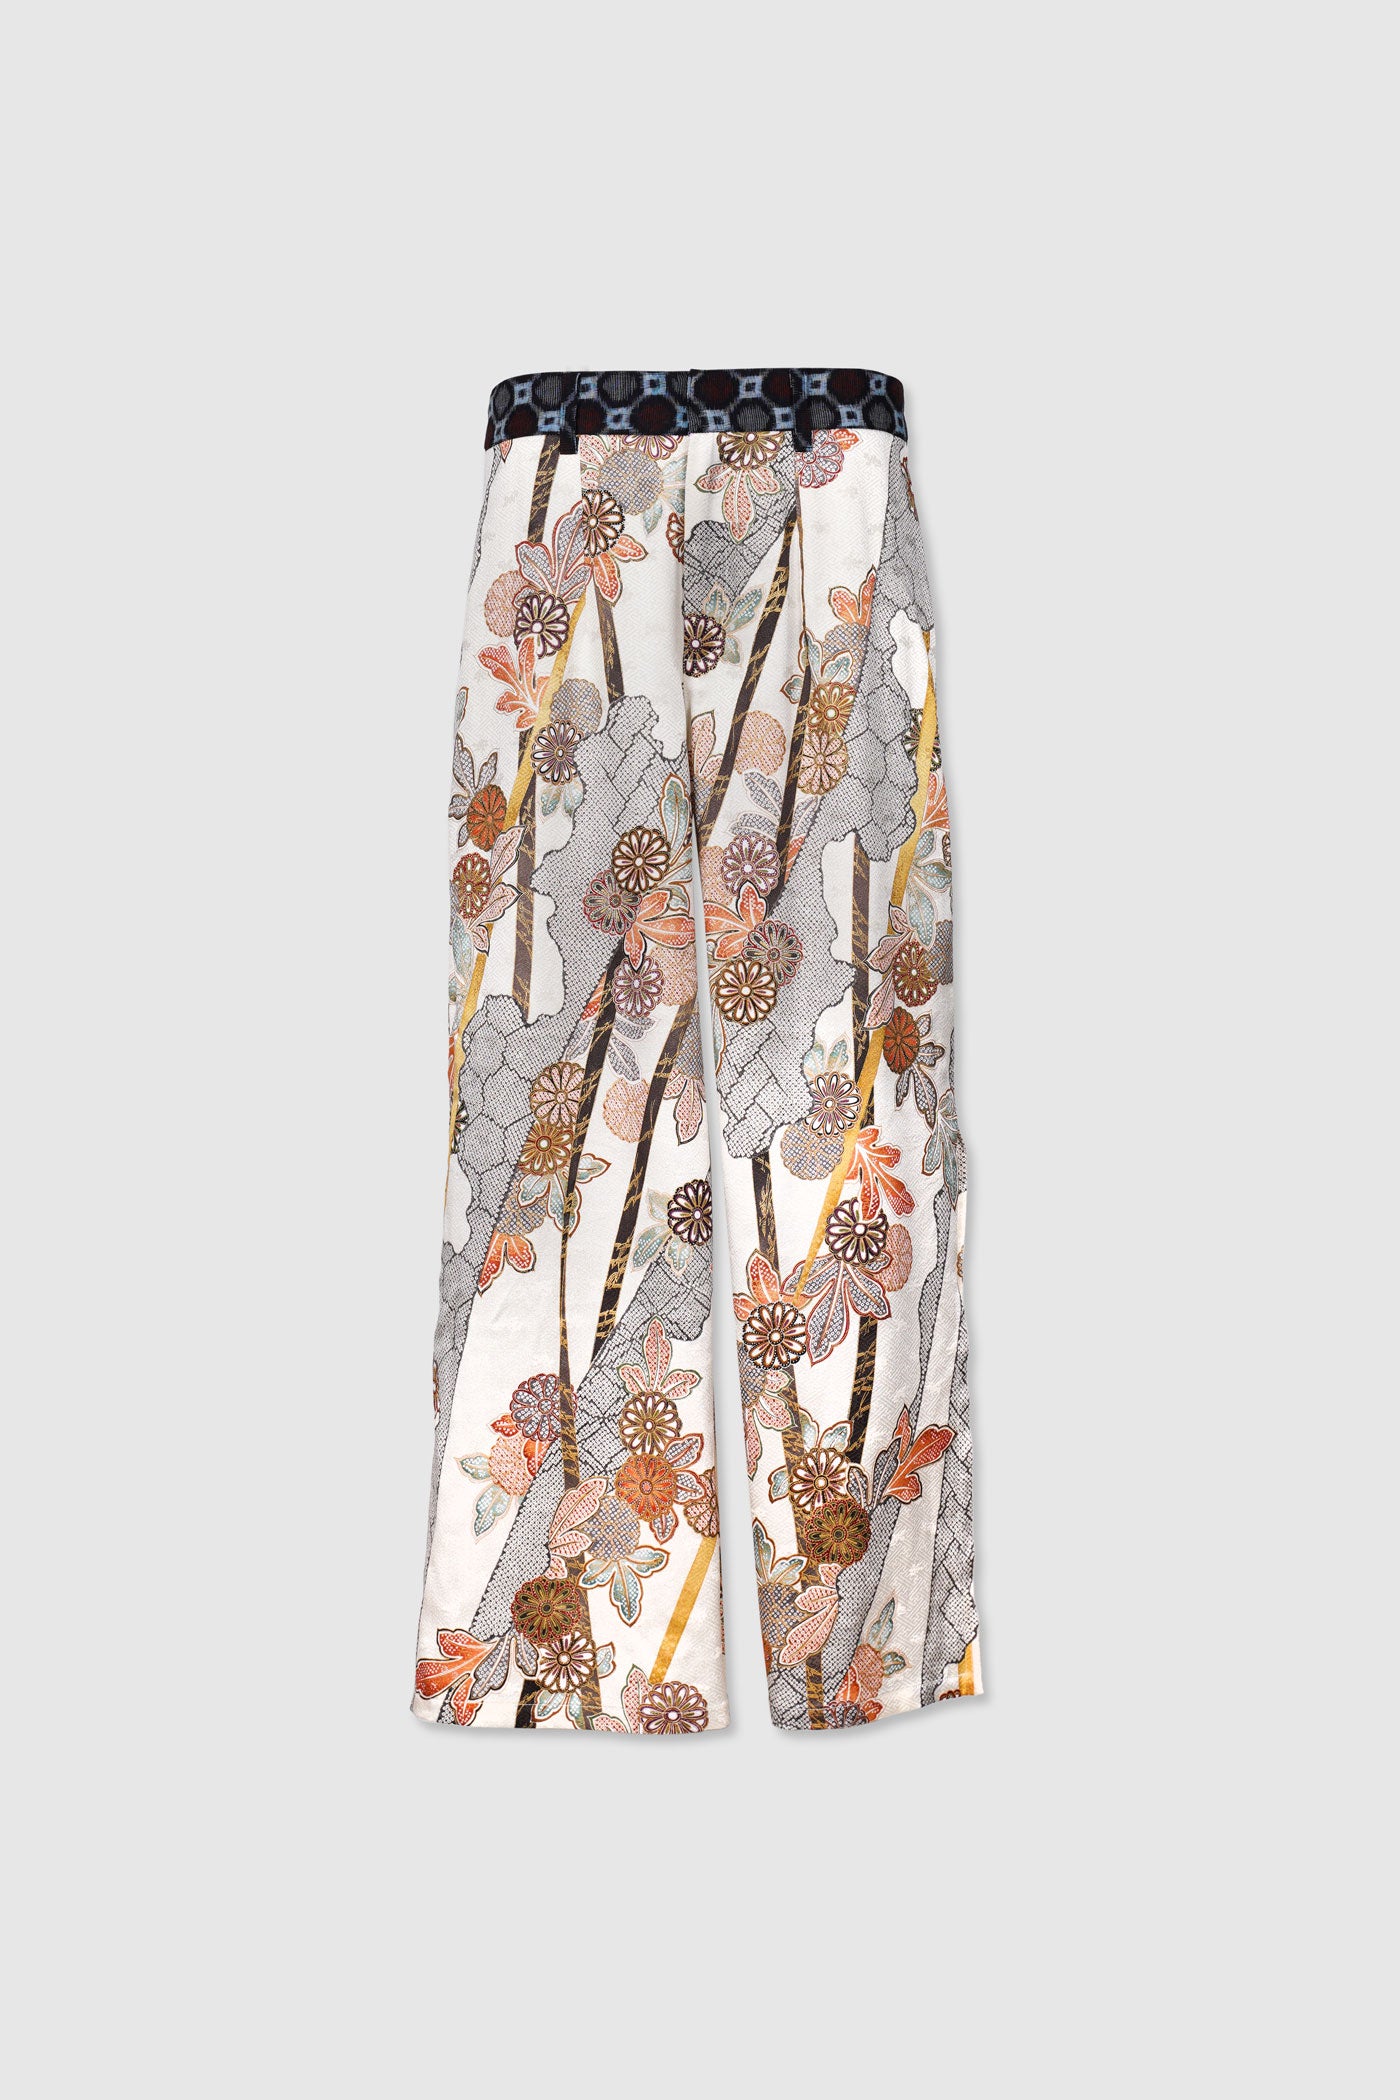 Multi Colored Wide Leg Pants by Terez for $22.50 | Rent the Runway